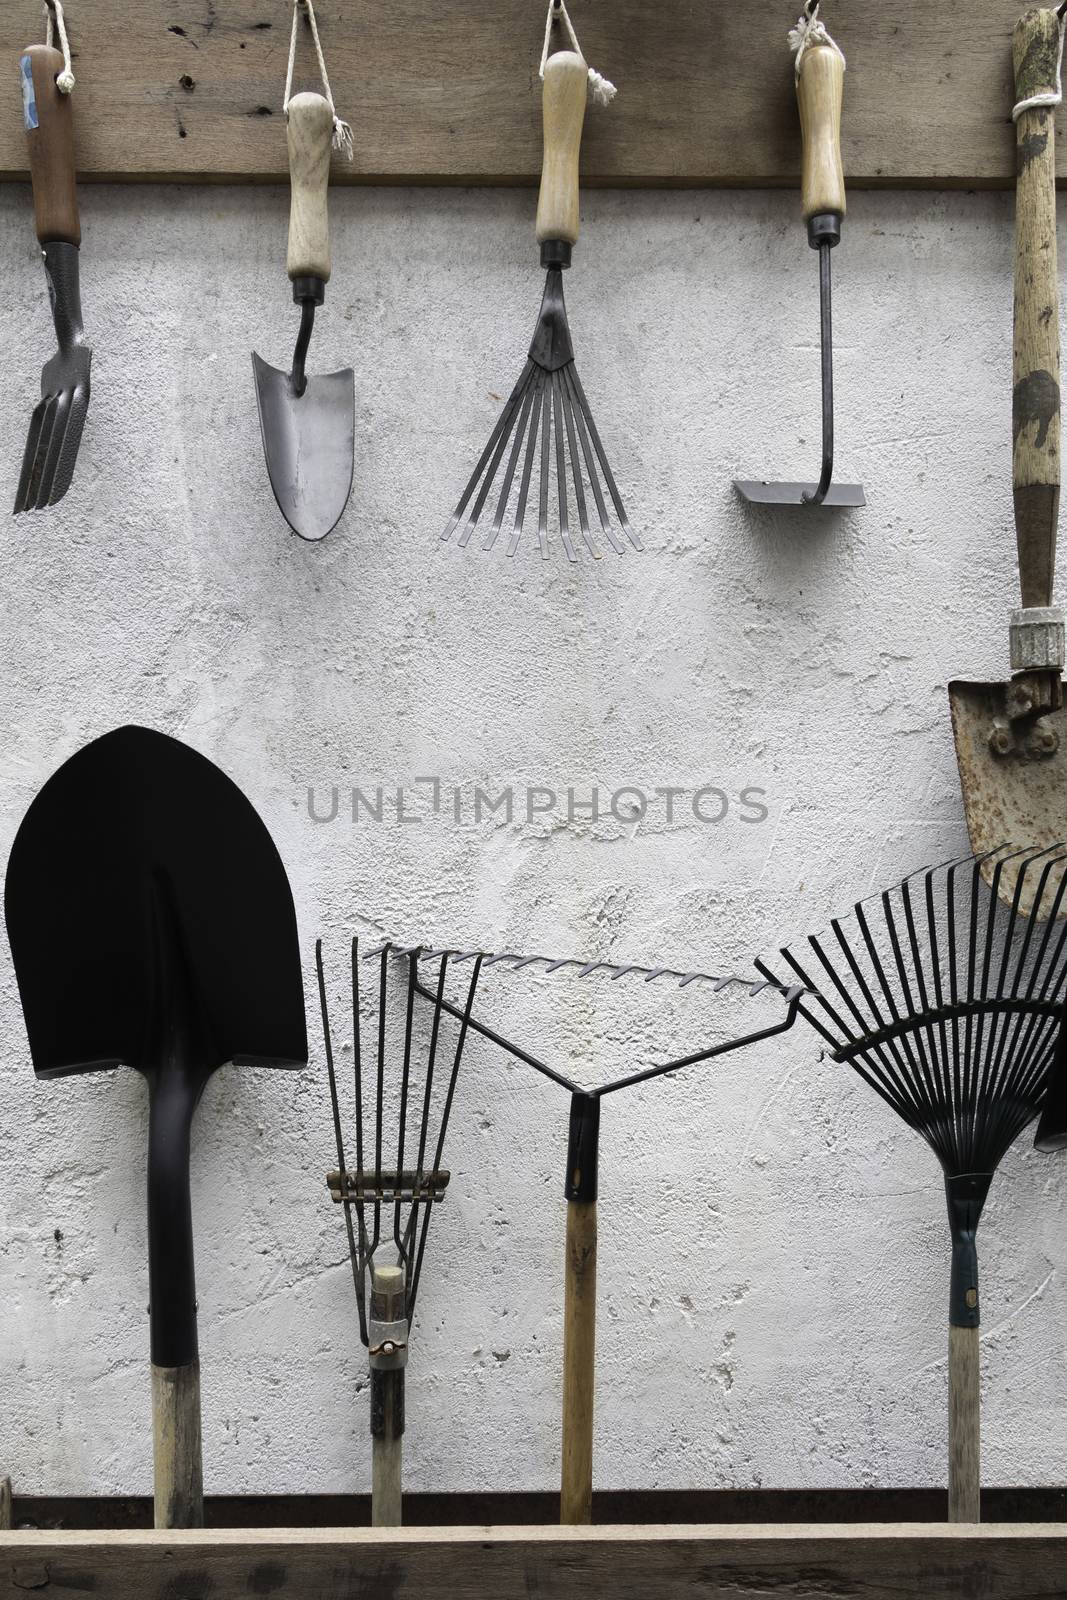 Garden Equipment hanged on the wall